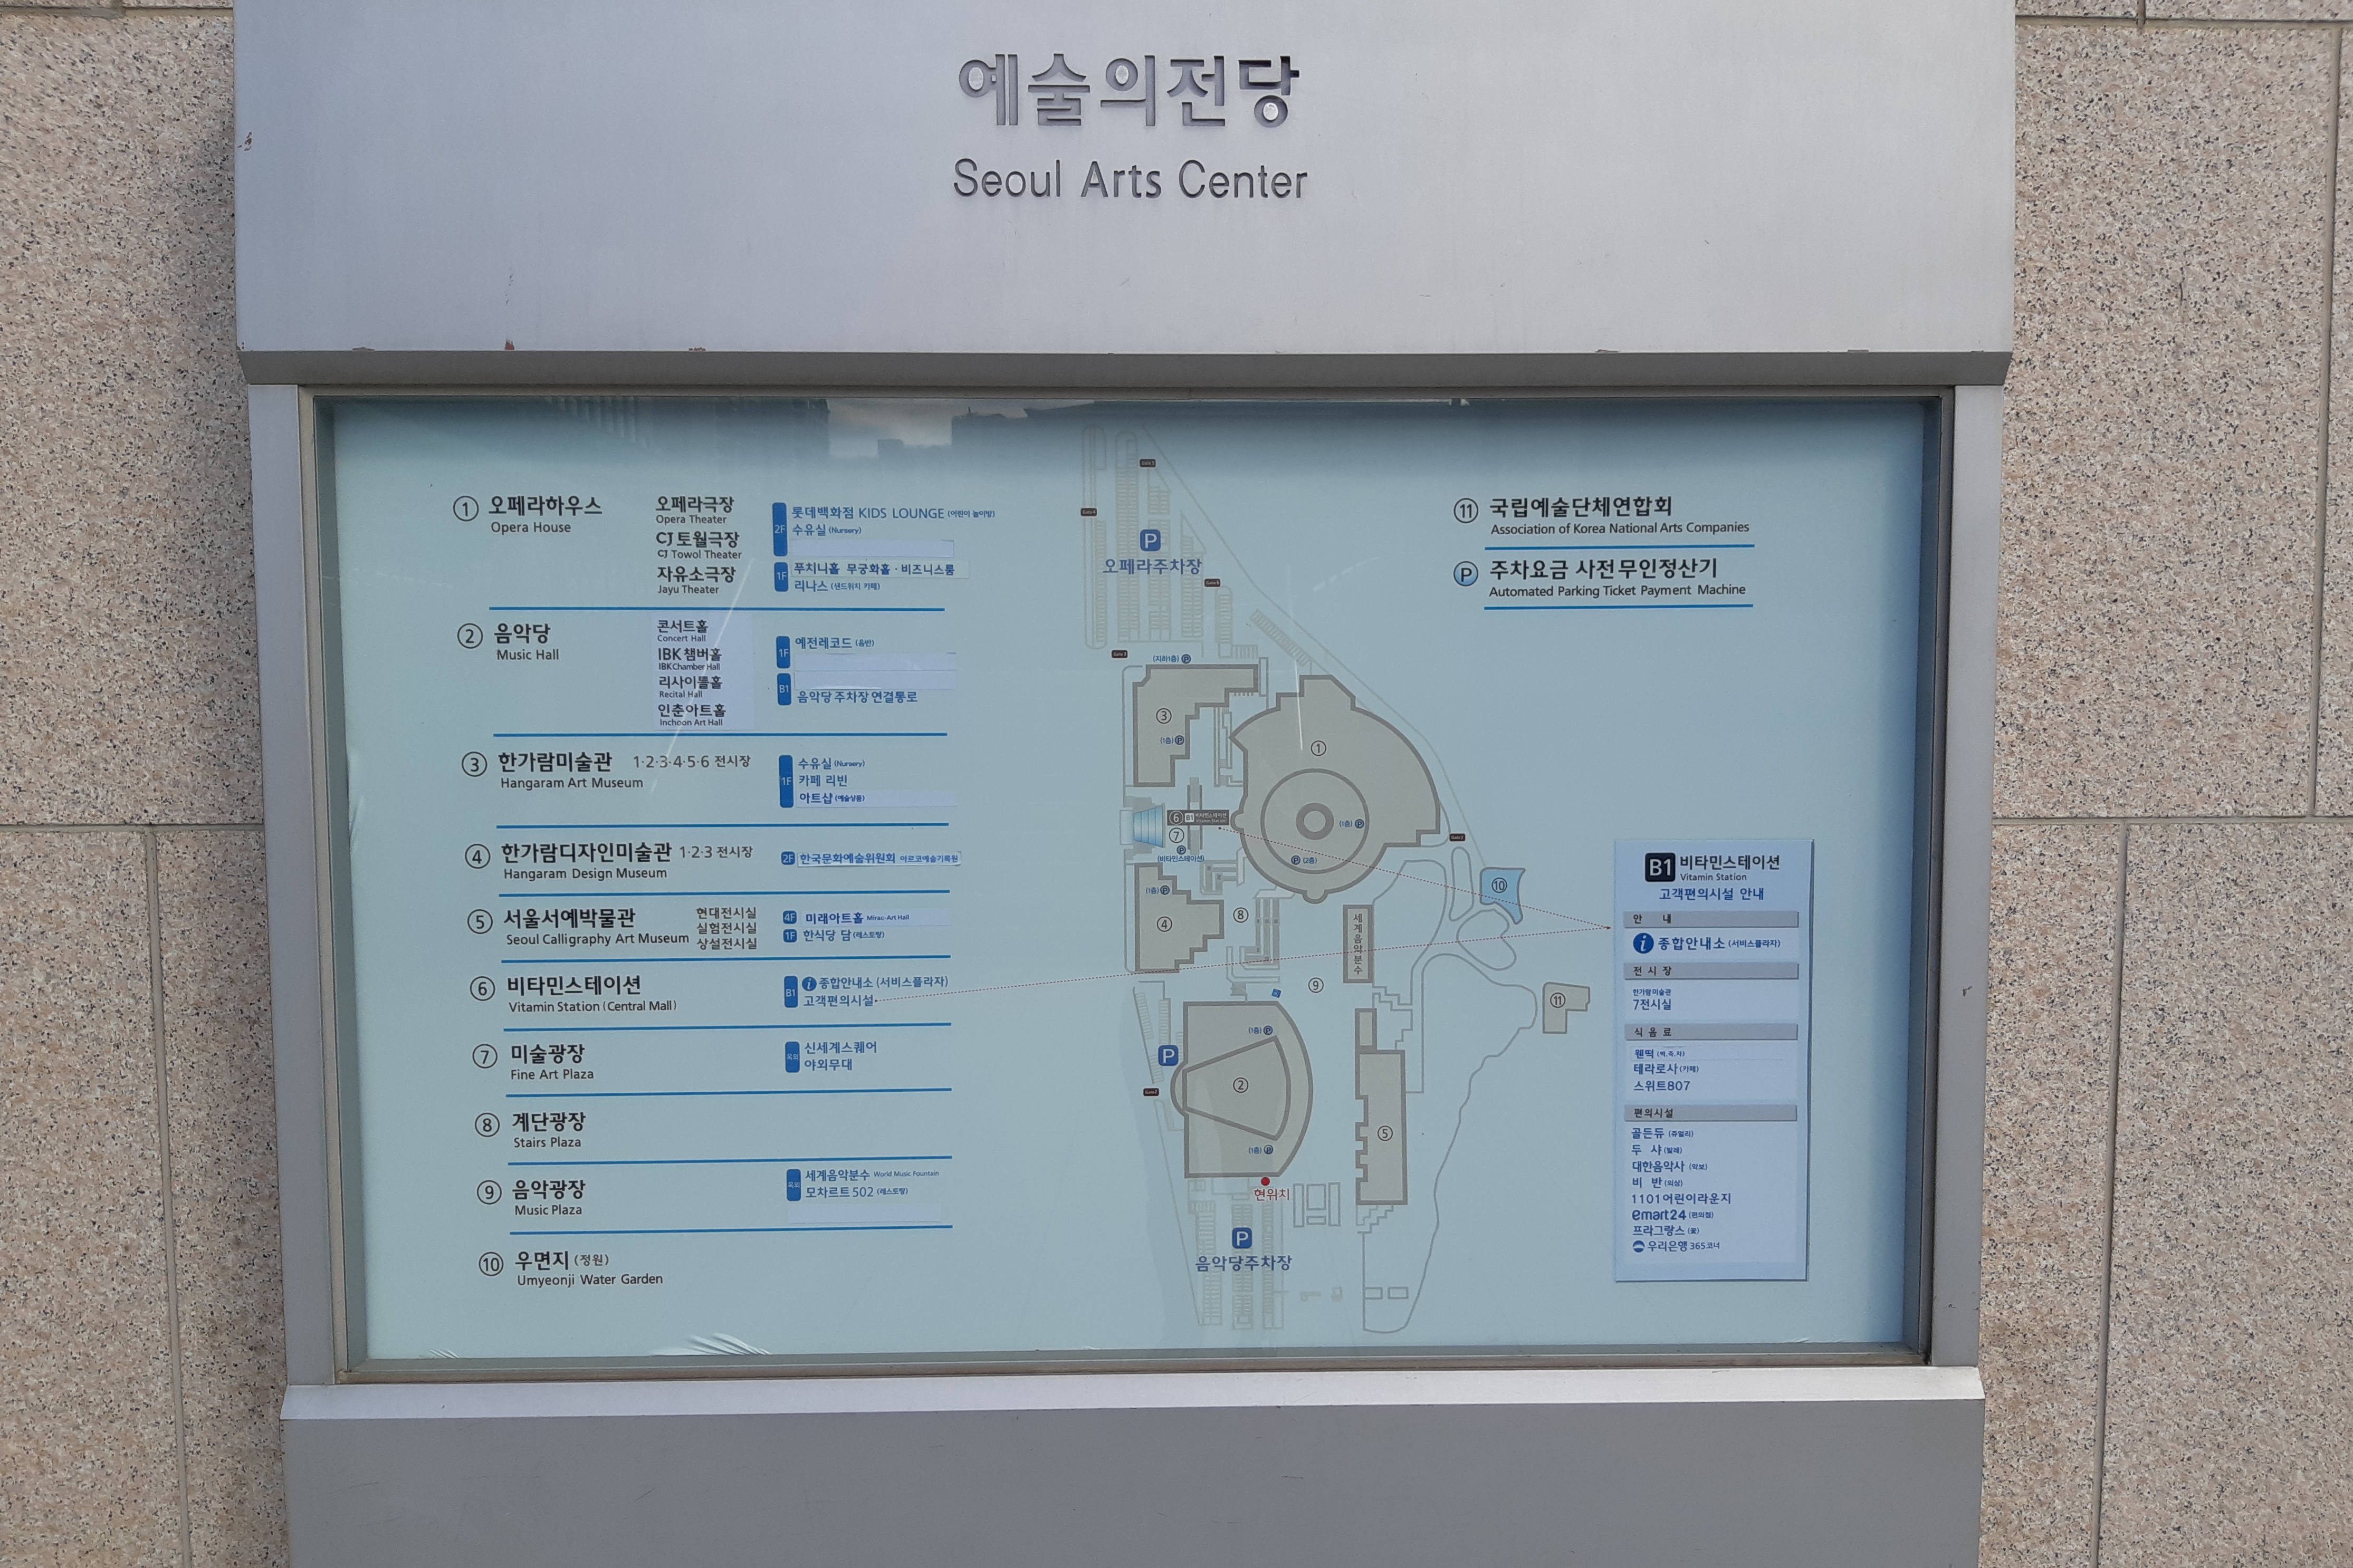 Information board/ Information desk 0 : An information board with map nearby the parking lot 